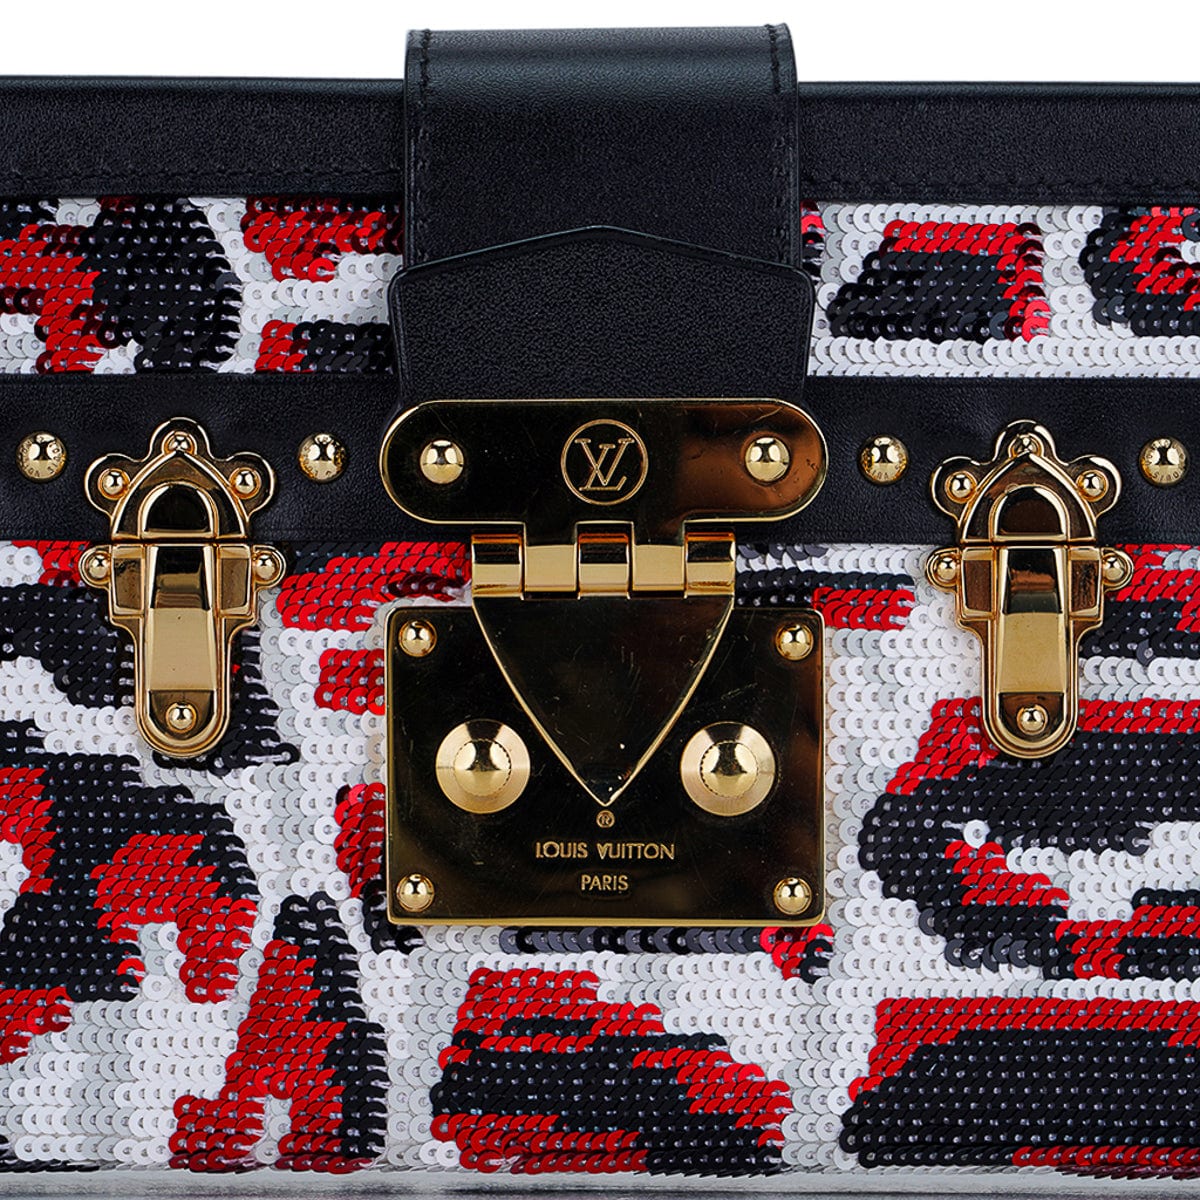 new LOUIS VUITTON SPRING 2022 BAGS! coussin, petite malle, cannes, alma  clutch? 